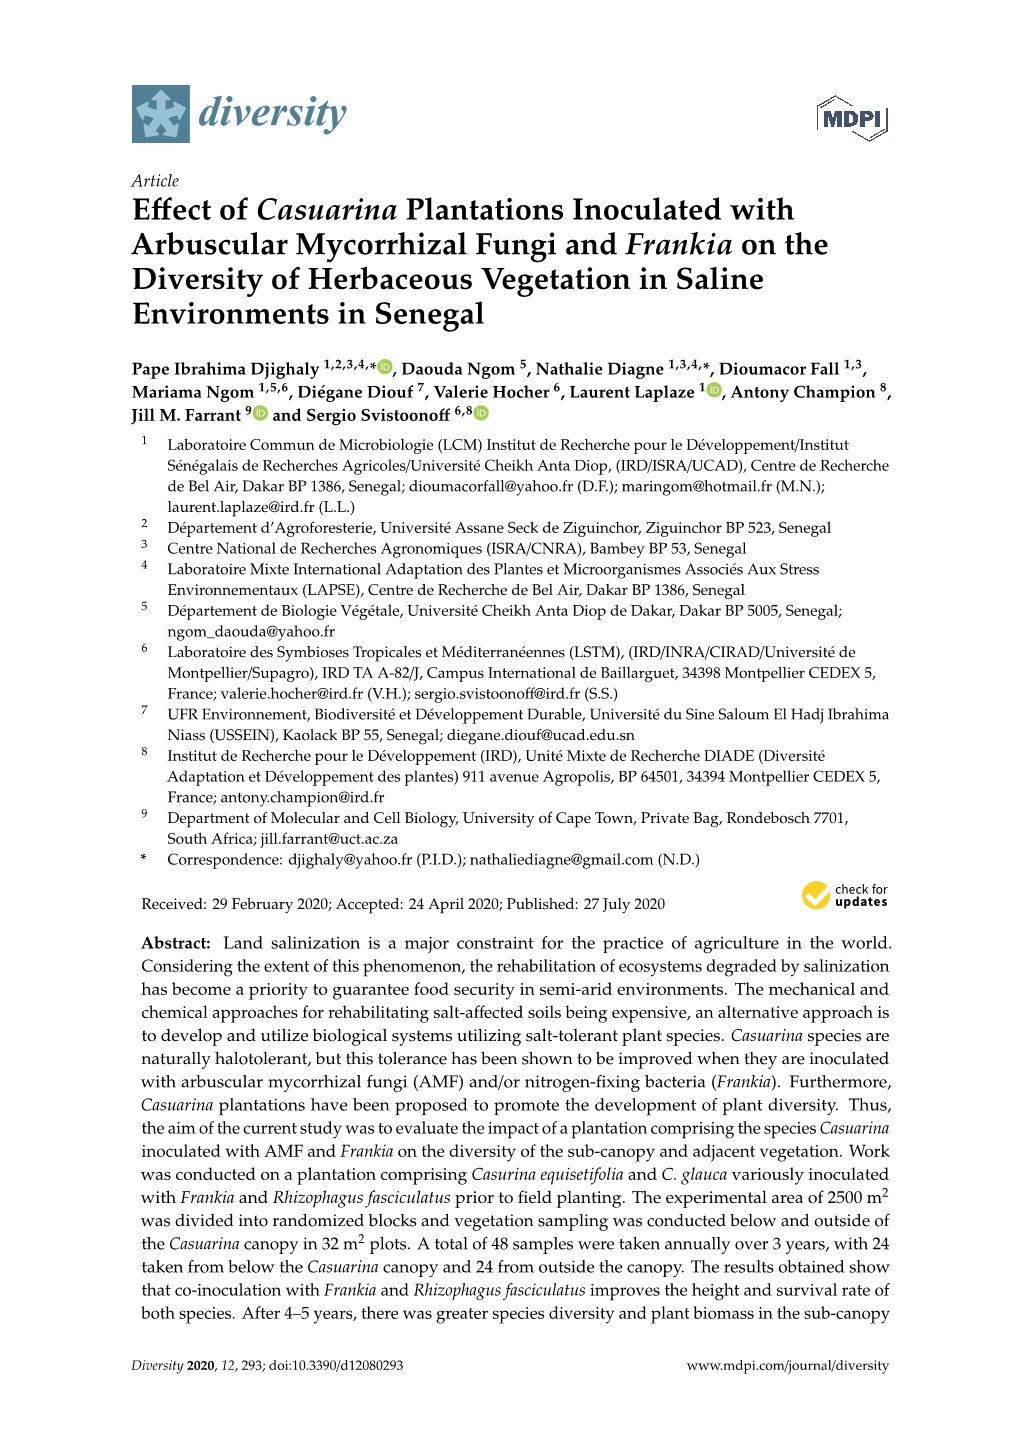 Effect of Casuarina Plantations Inoculated with Arbuscular Mycorrhizal Fungi and Frankia on the Diversity of Herbaceous Vegetati